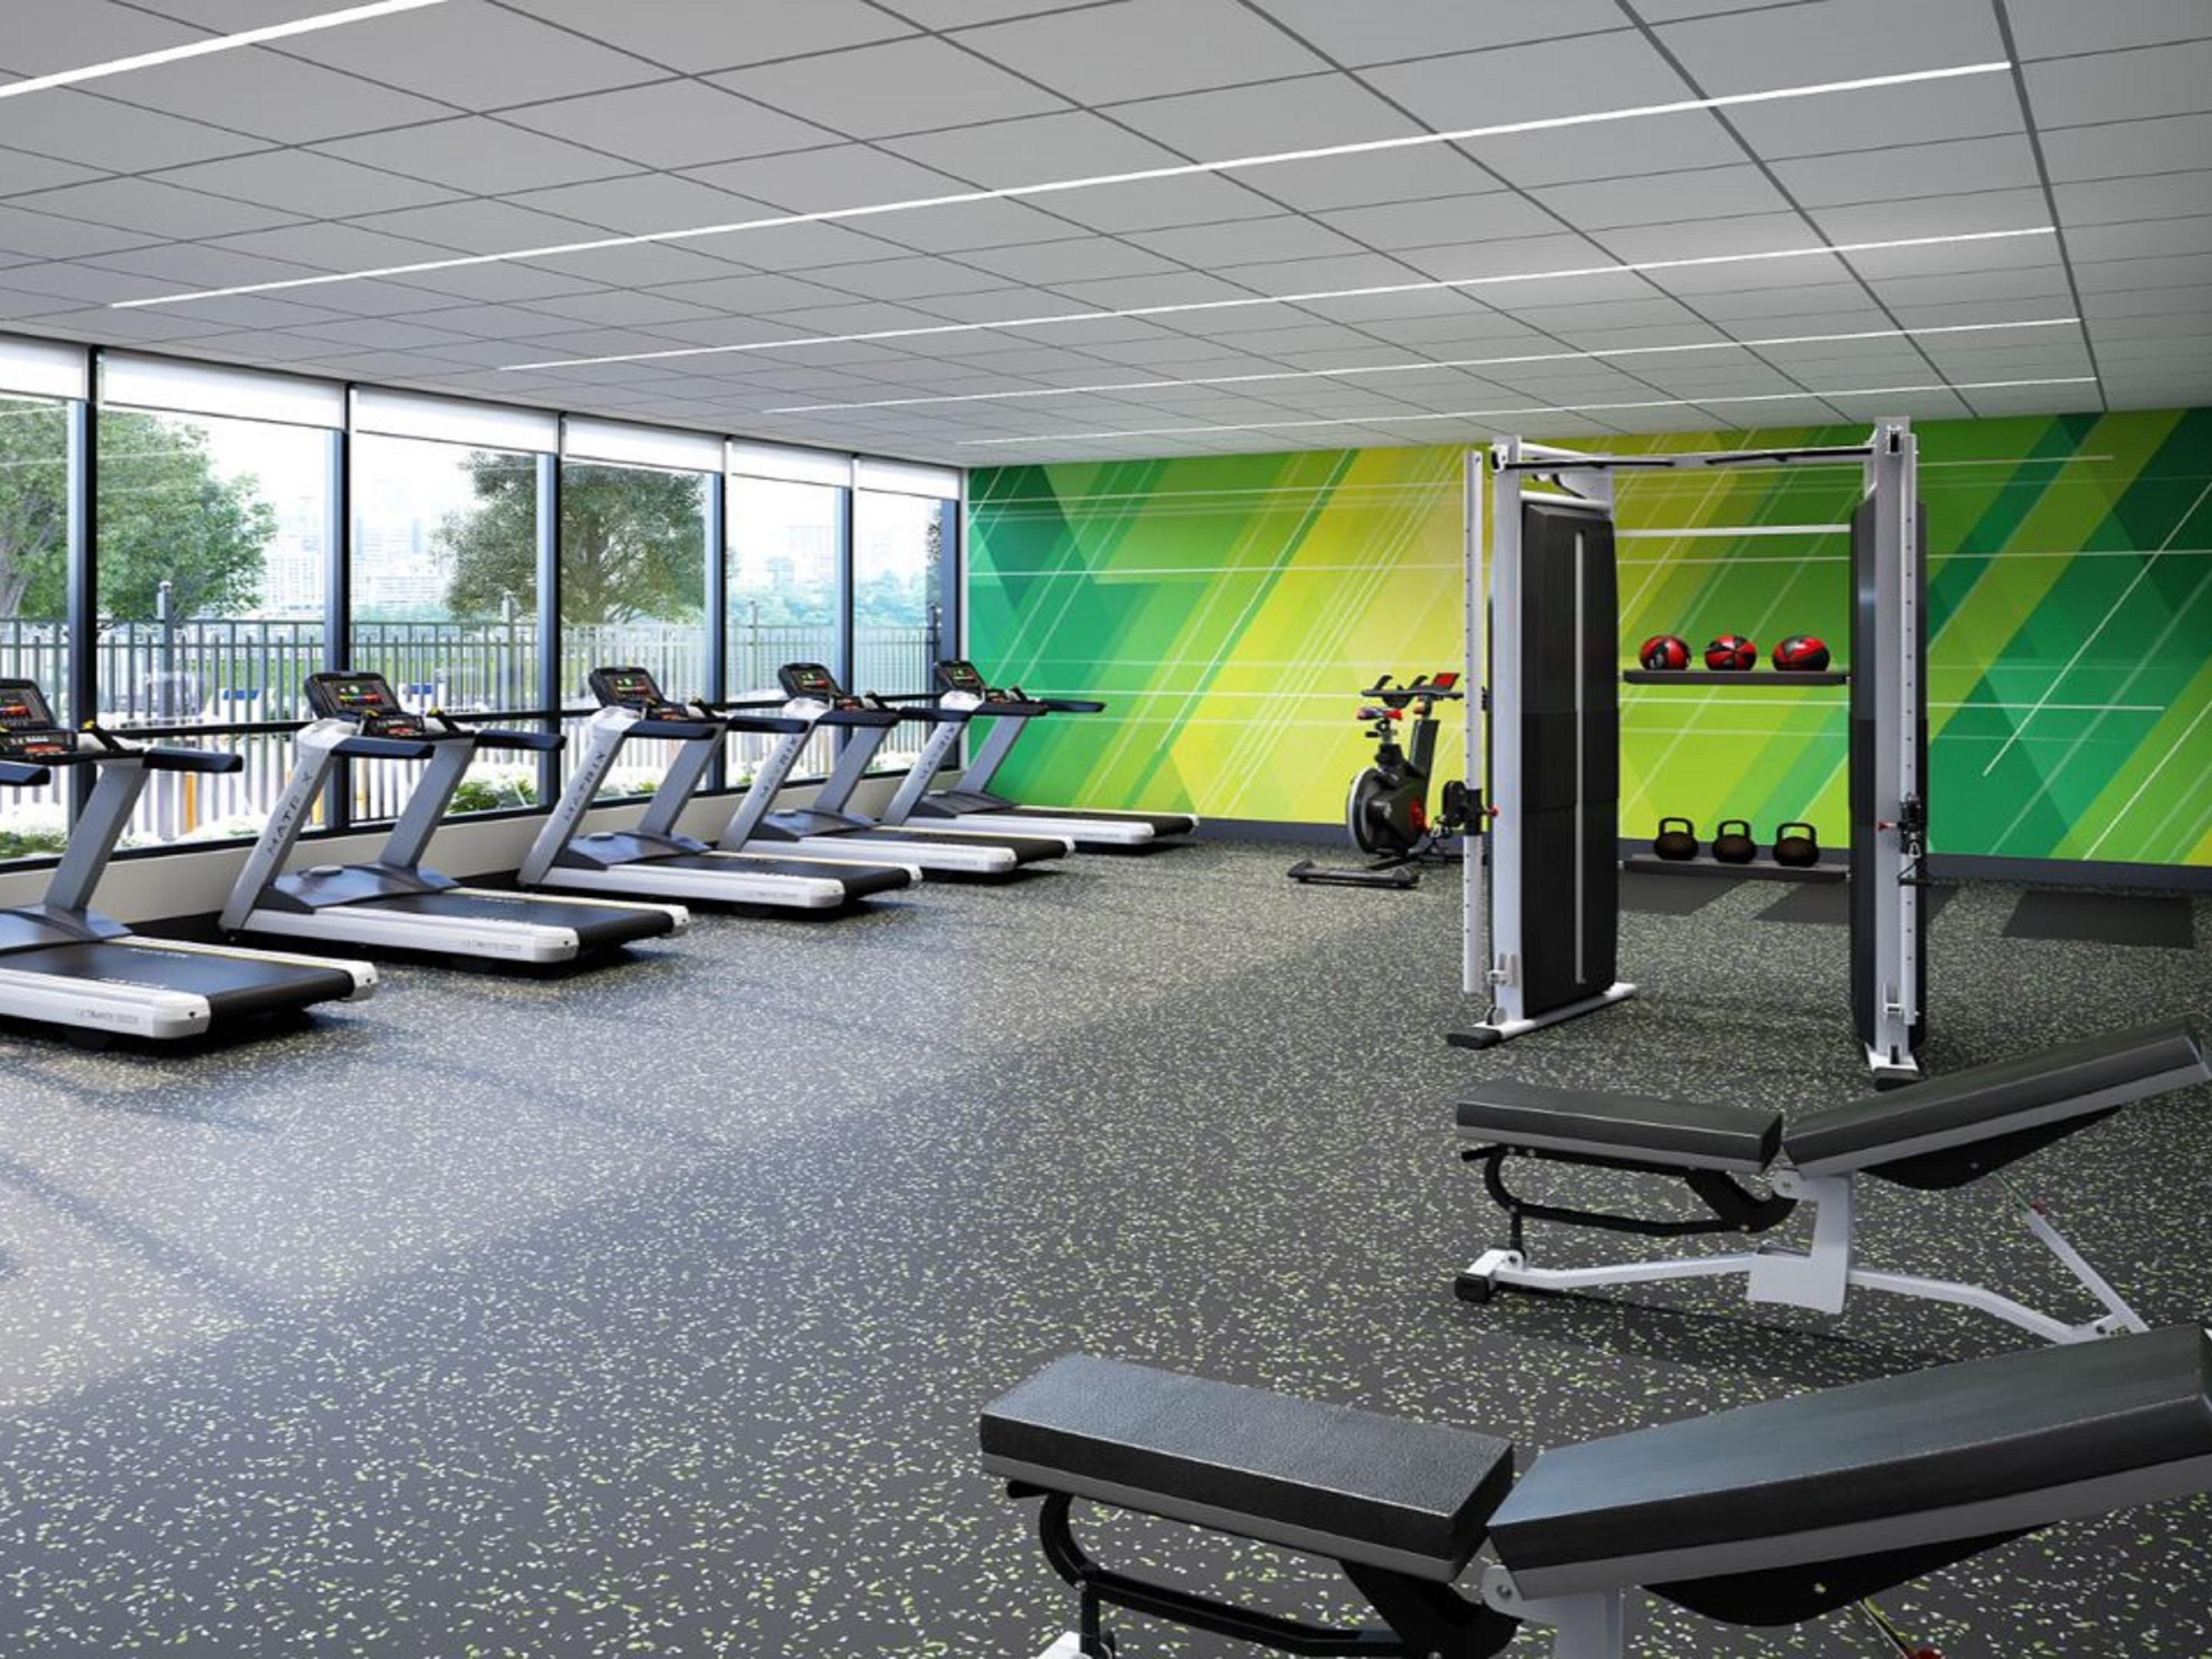 Get your sweat on in our complimentary, fully equipped fitness center- open 24/7.